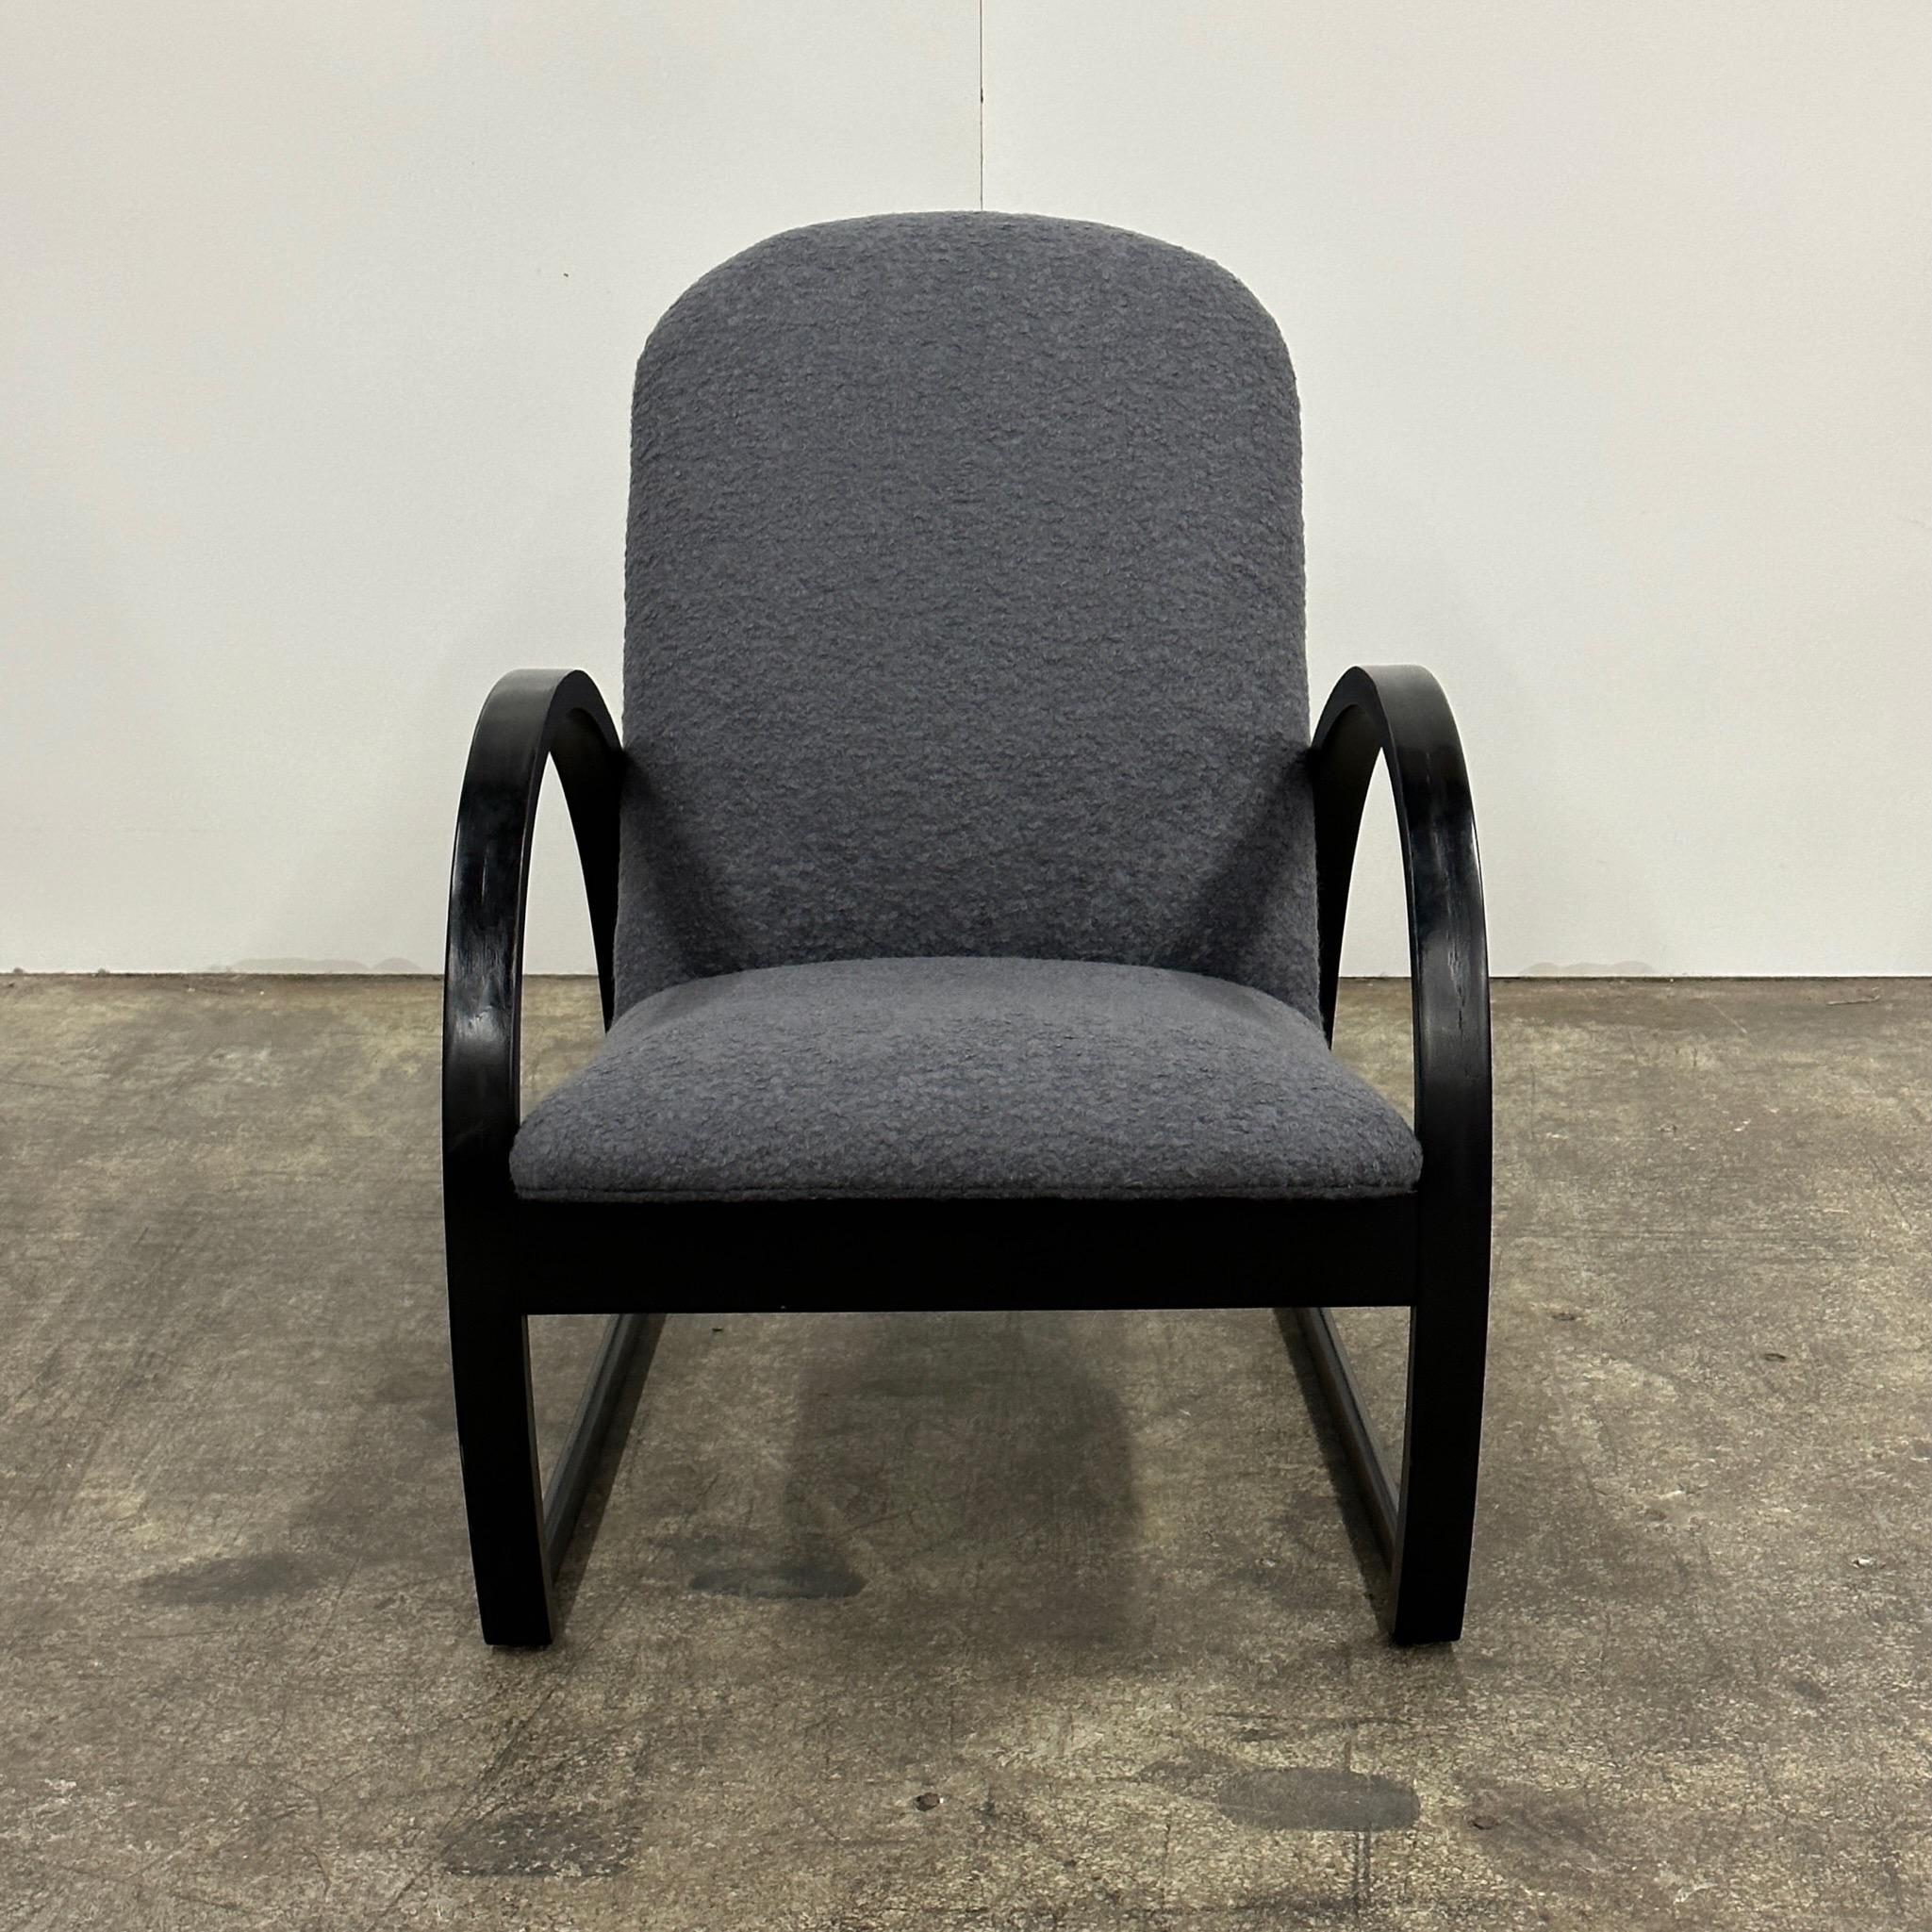 American Lazy Spiral Chair by Peter Danko For Sale